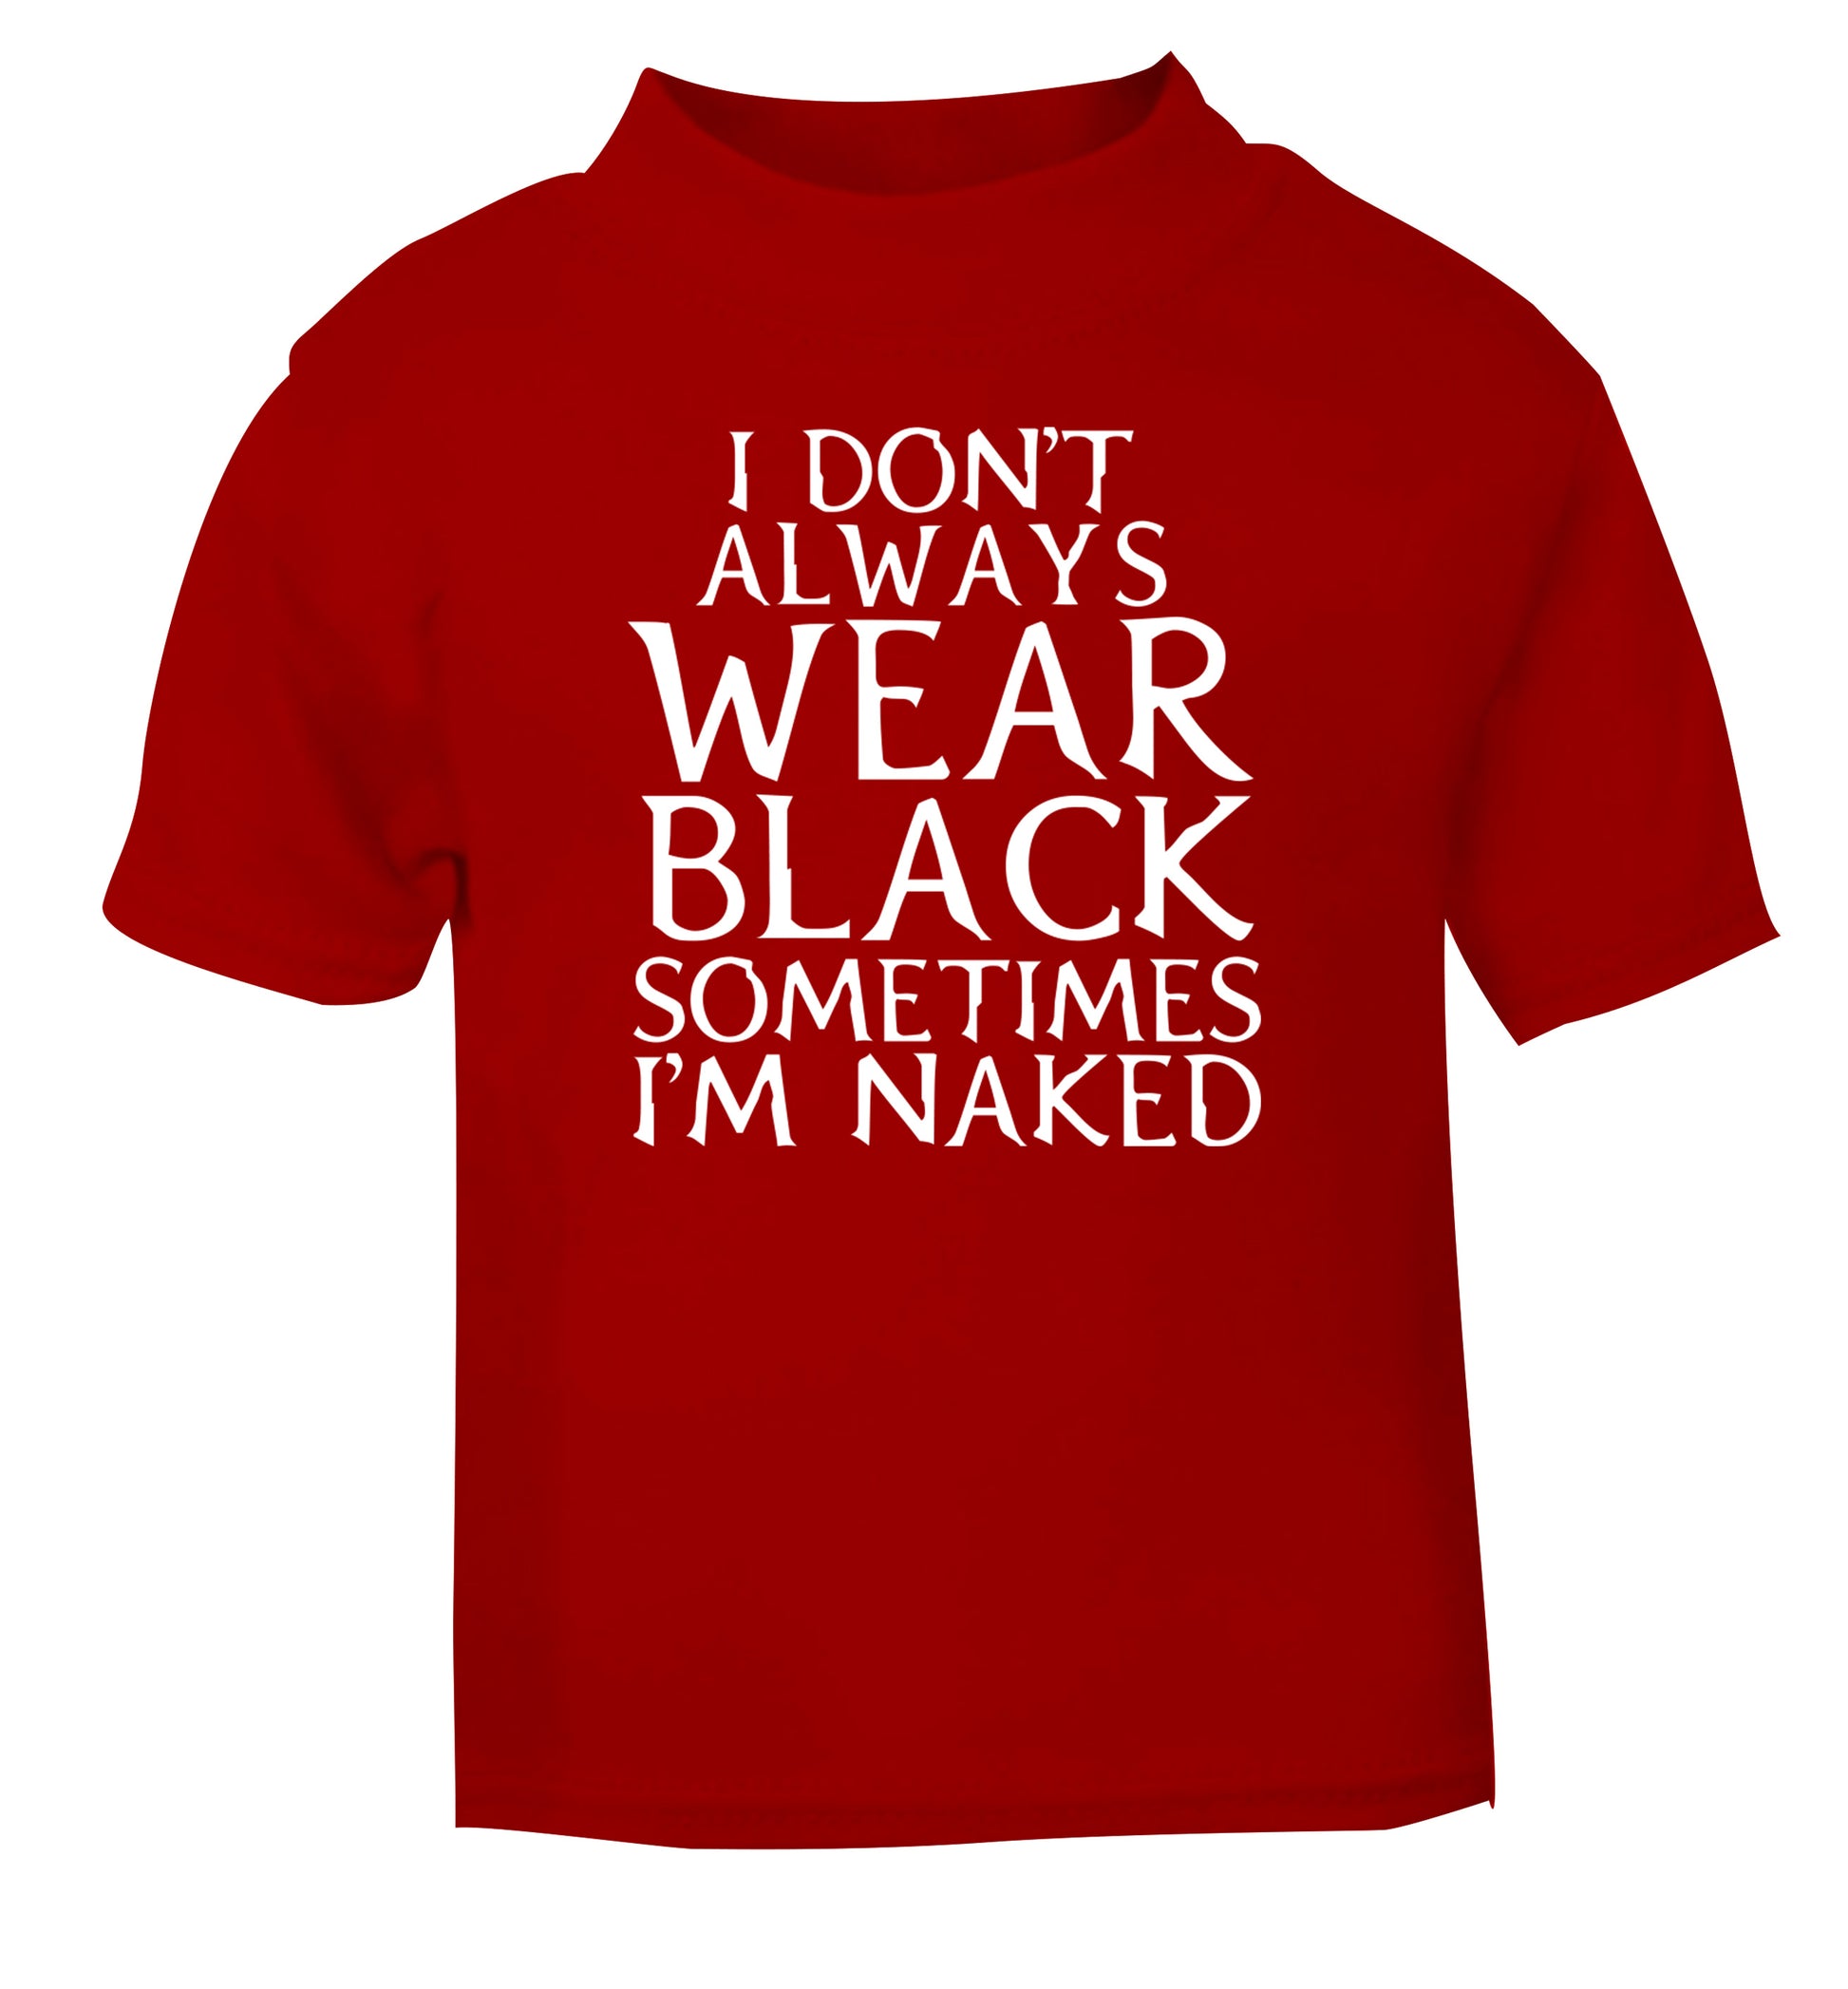 I don't always wear black sometimes I'm naked red Baby Toddler Tshirt 2 Years